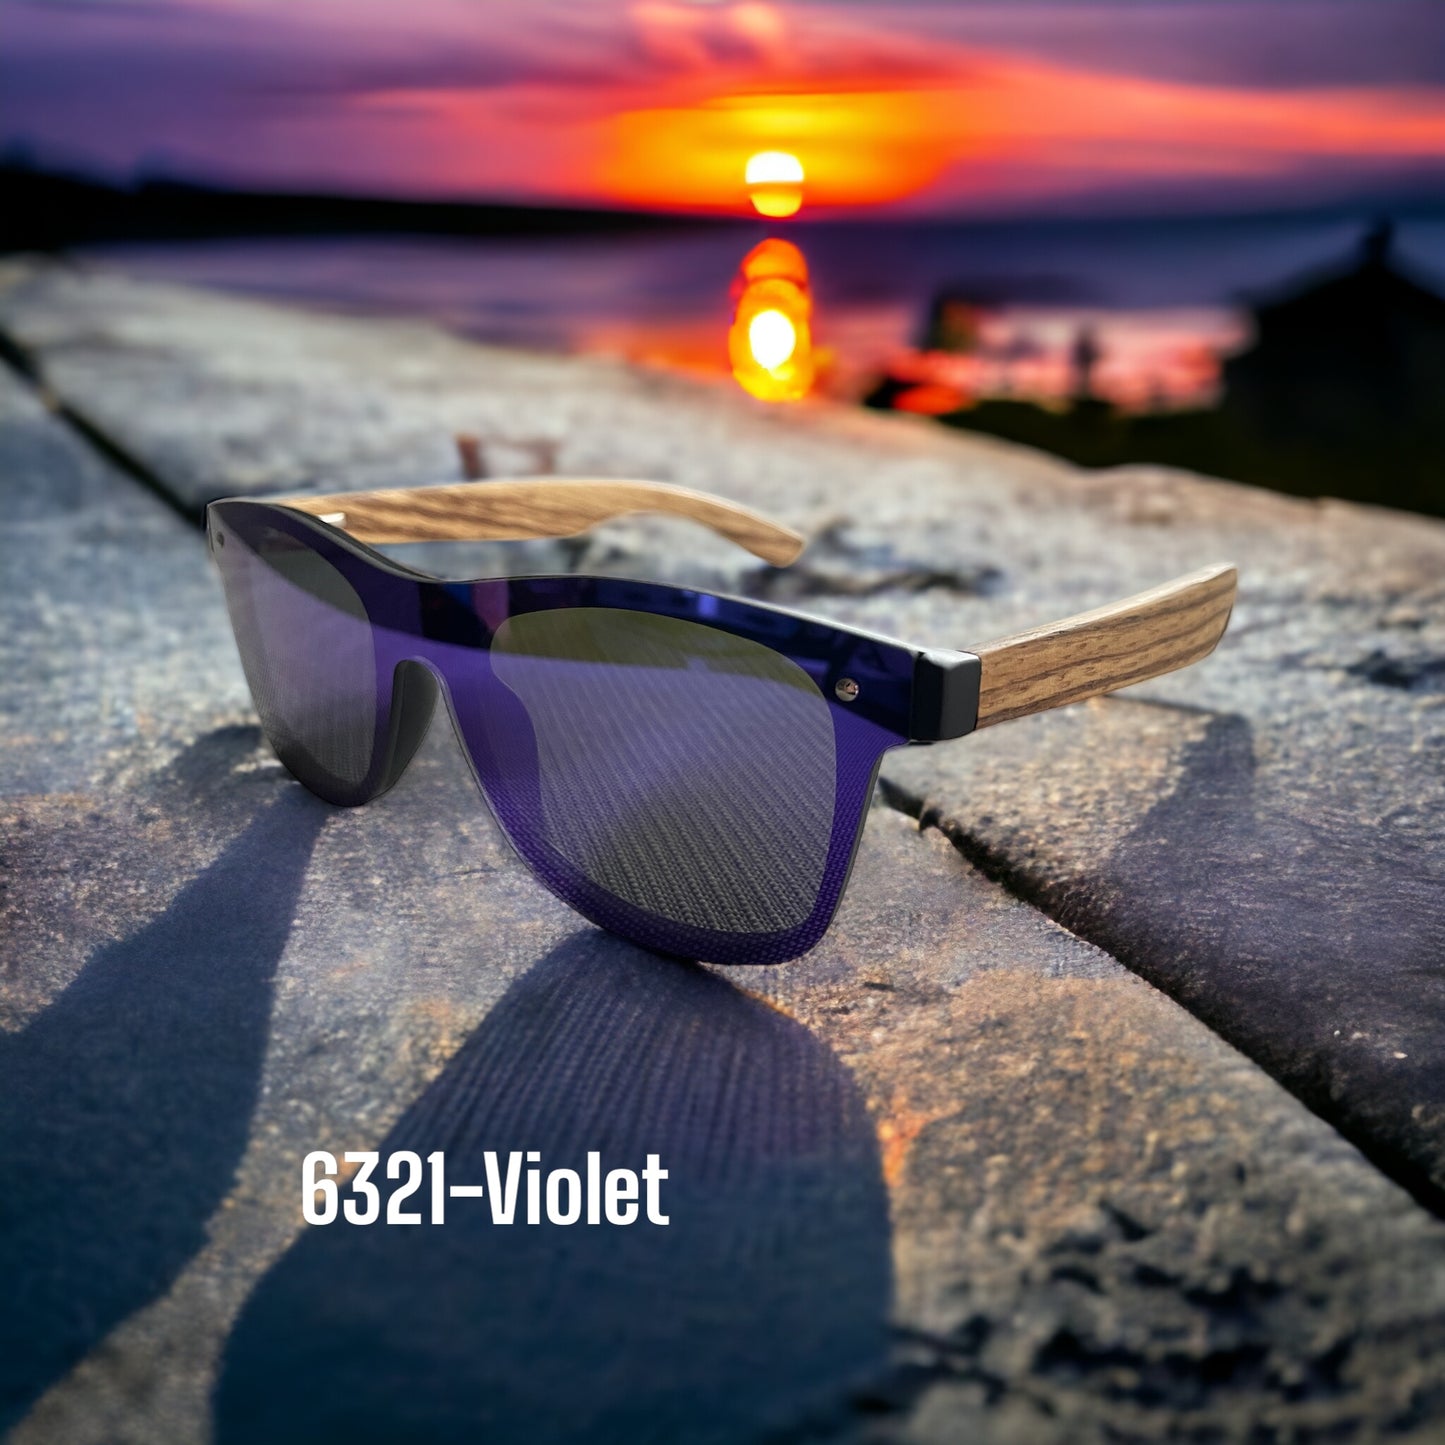 6321-violet Stylish Sunglasses with colored Wood/Bamboo Frame UV400 Lens fit all weather